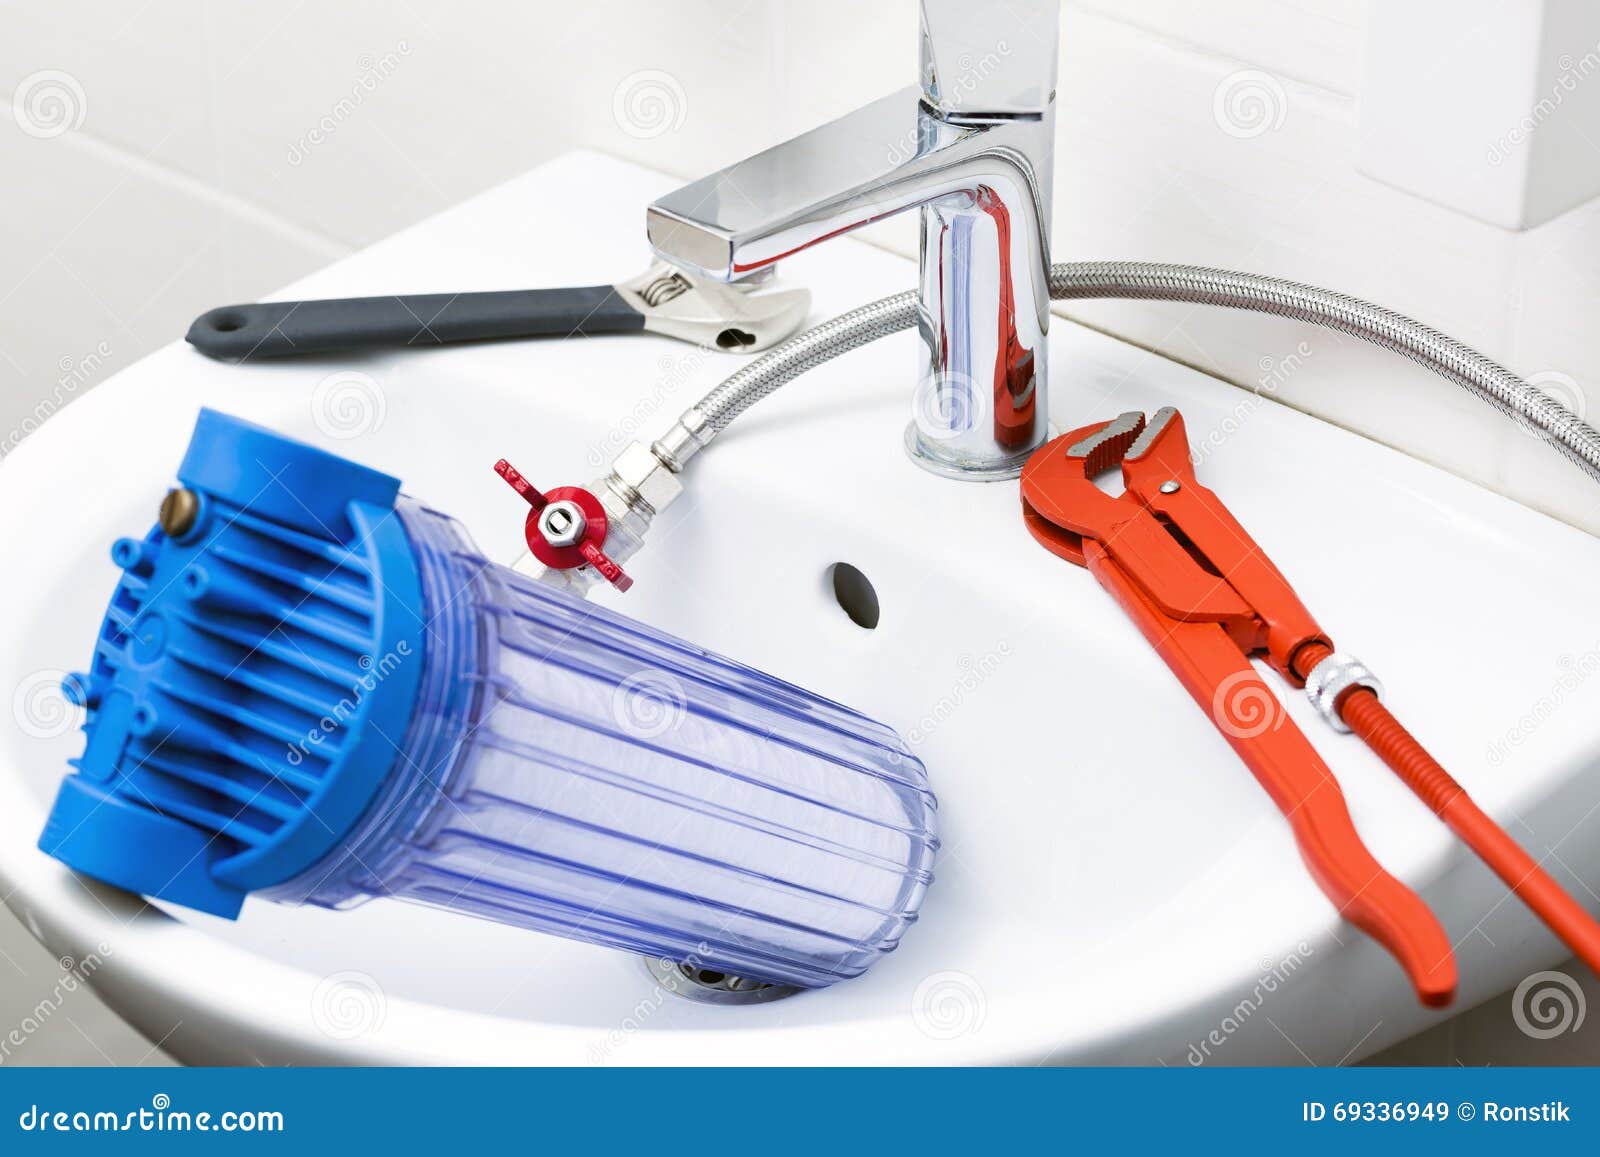 plumber equipment and water filter in the sink